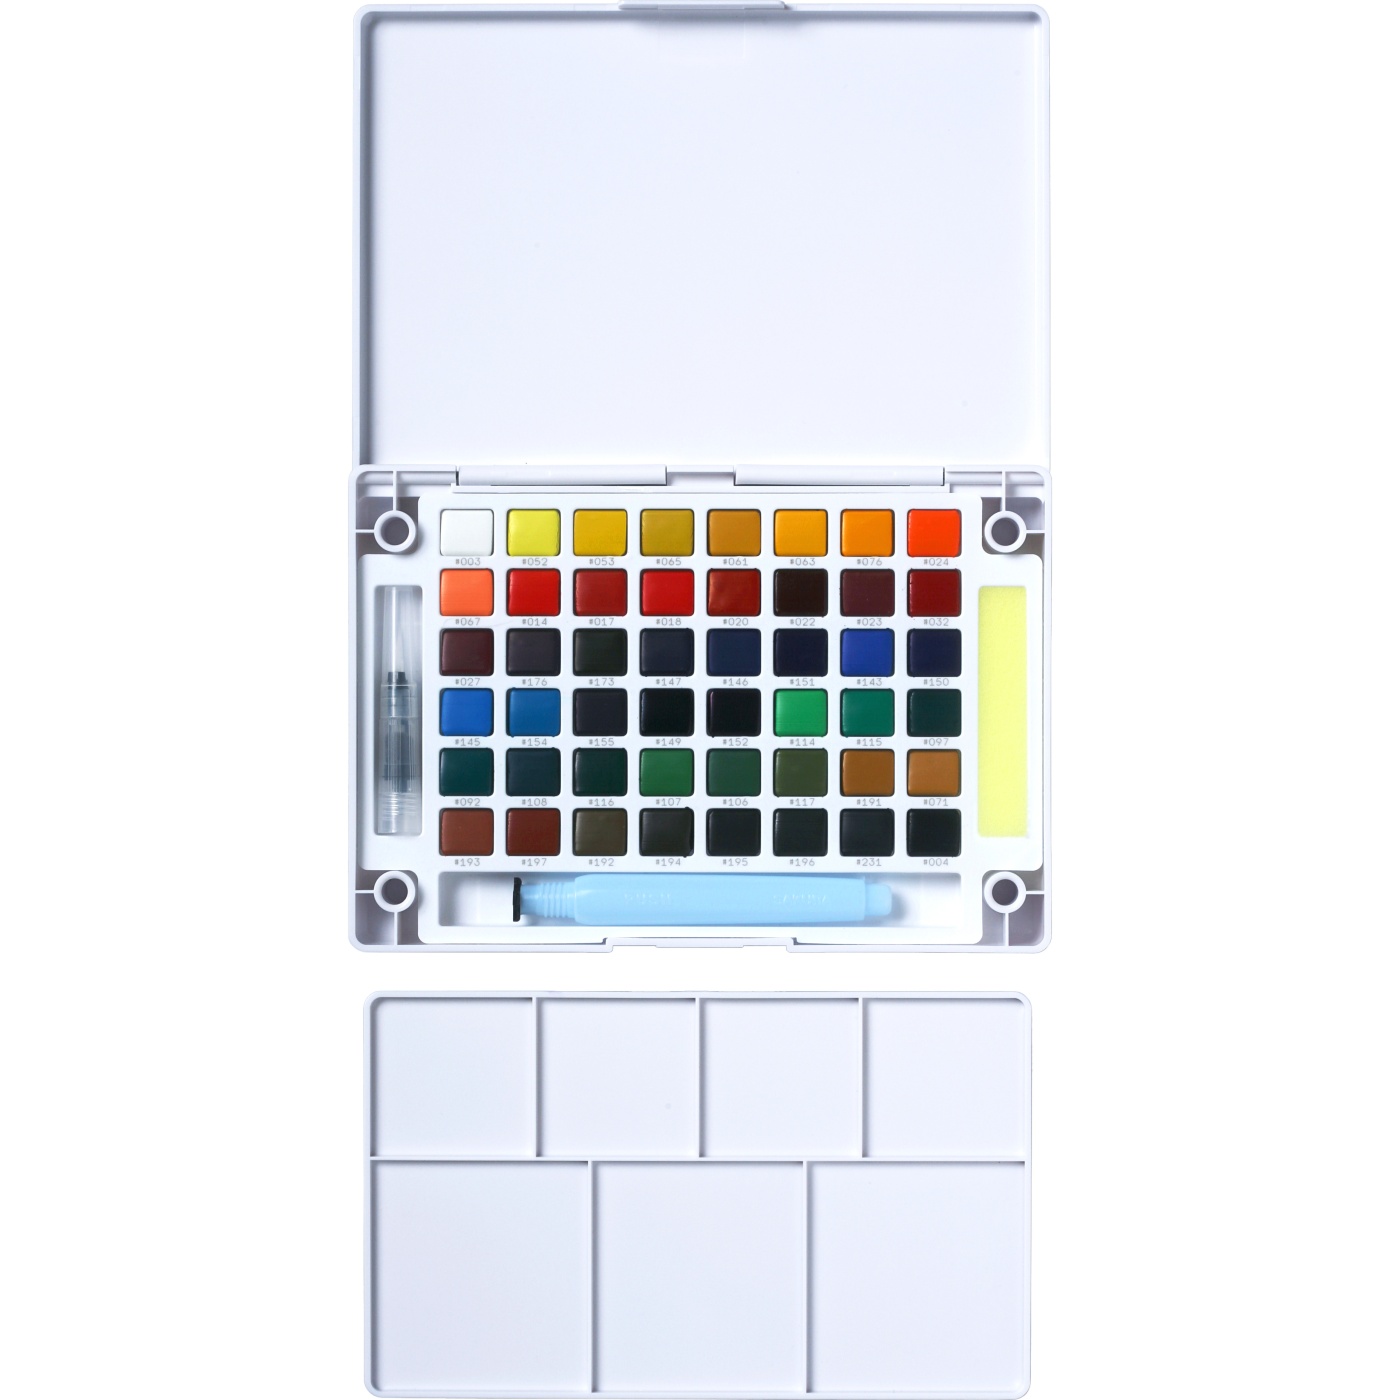 Koi Water Colors Sketch Box 48 in the group Art Supplies / Colors / Watercolor Paint at Pen Store (103506)